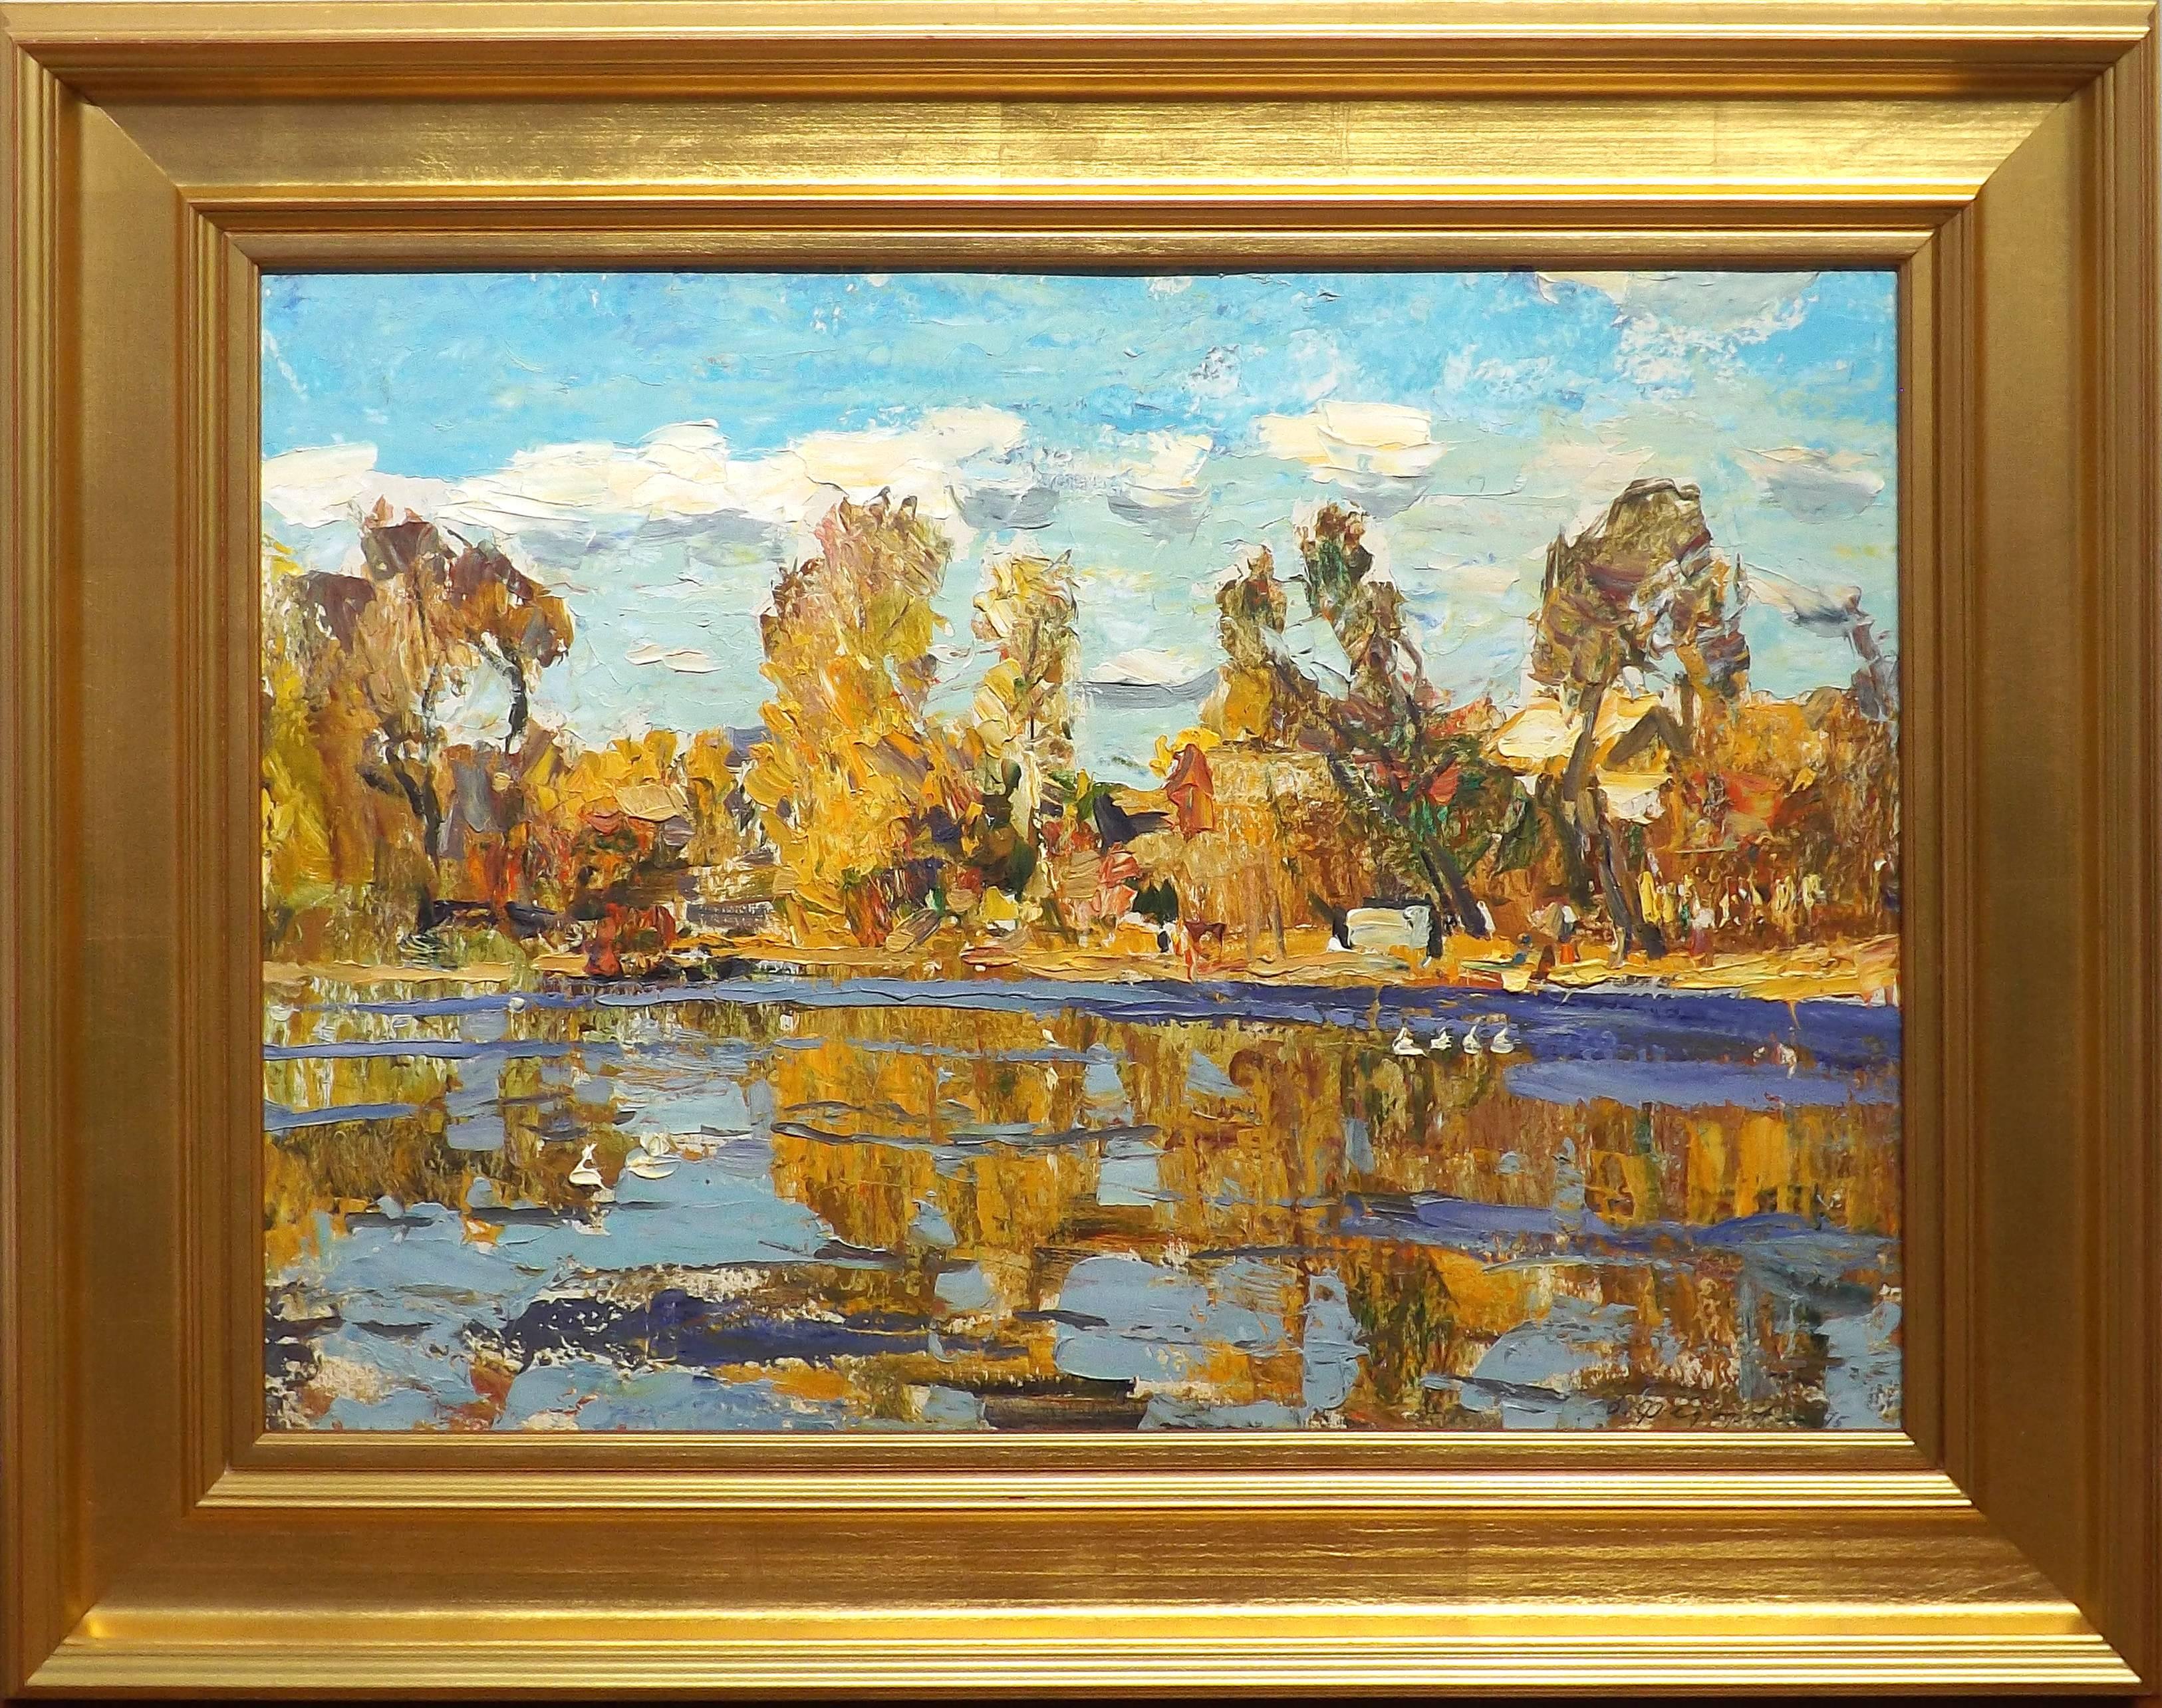 Bright fall trees surround a small lake in this brilliant painting by Russian artist Vyacheslav Andreevich Fedorov (1918 - 1985). Swans float lazily in the reflective blue lake under a sparsely clouded sky.

Fedorov was born in Ivanovo, Vosnesensk